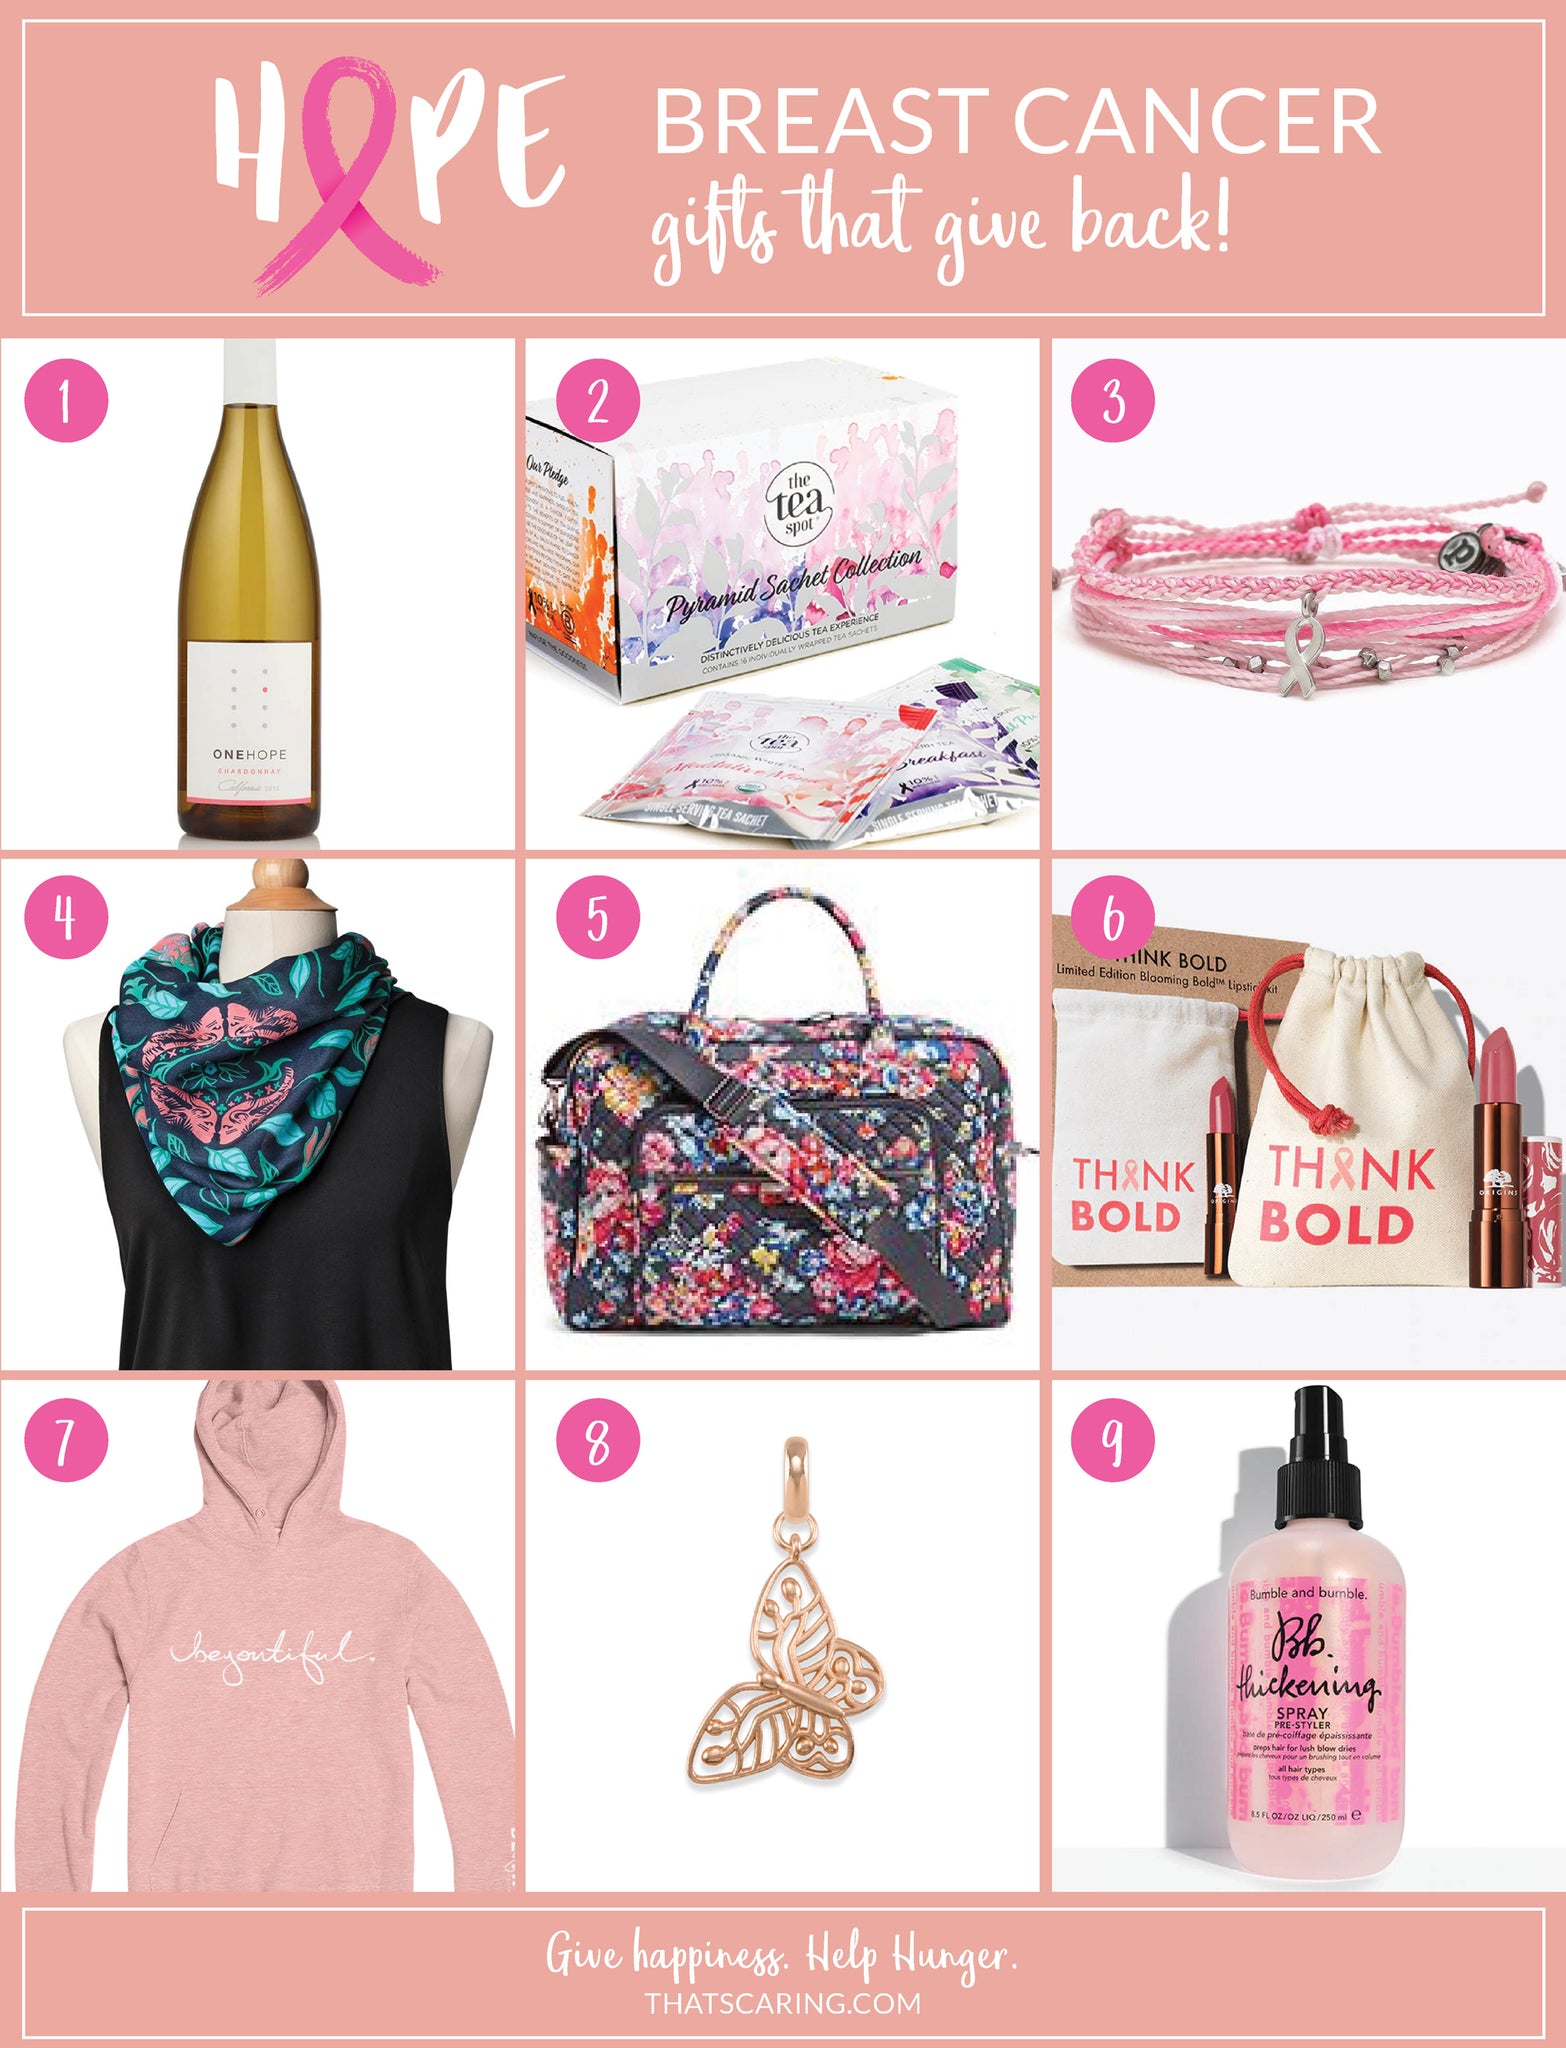 Products the Give Back to Breast Cancer 